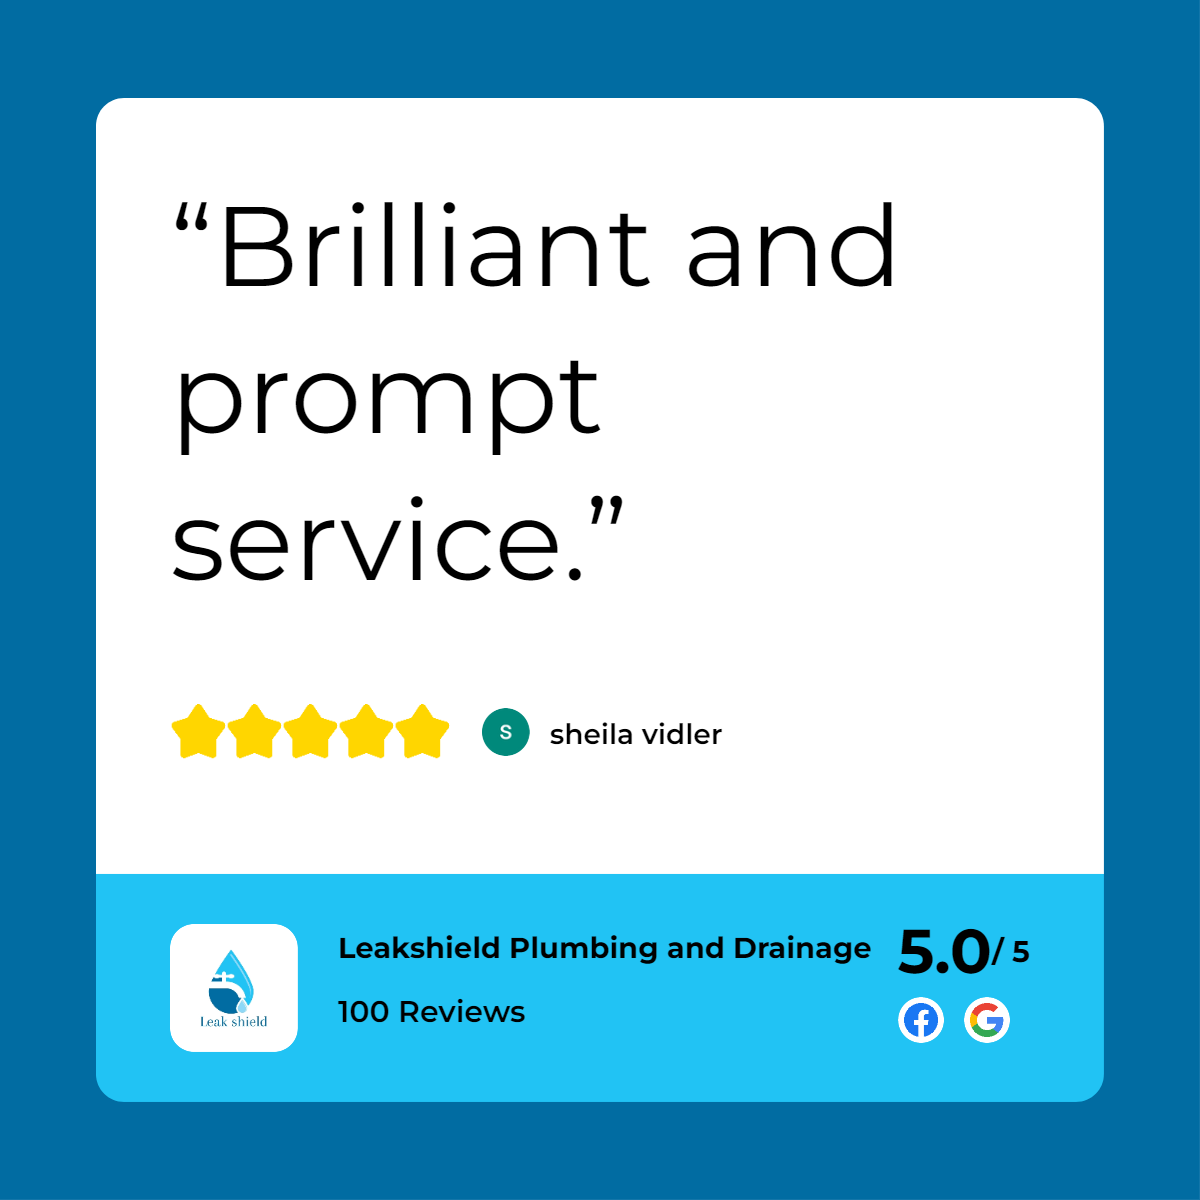 A customer review for leeds plumbing and drains.